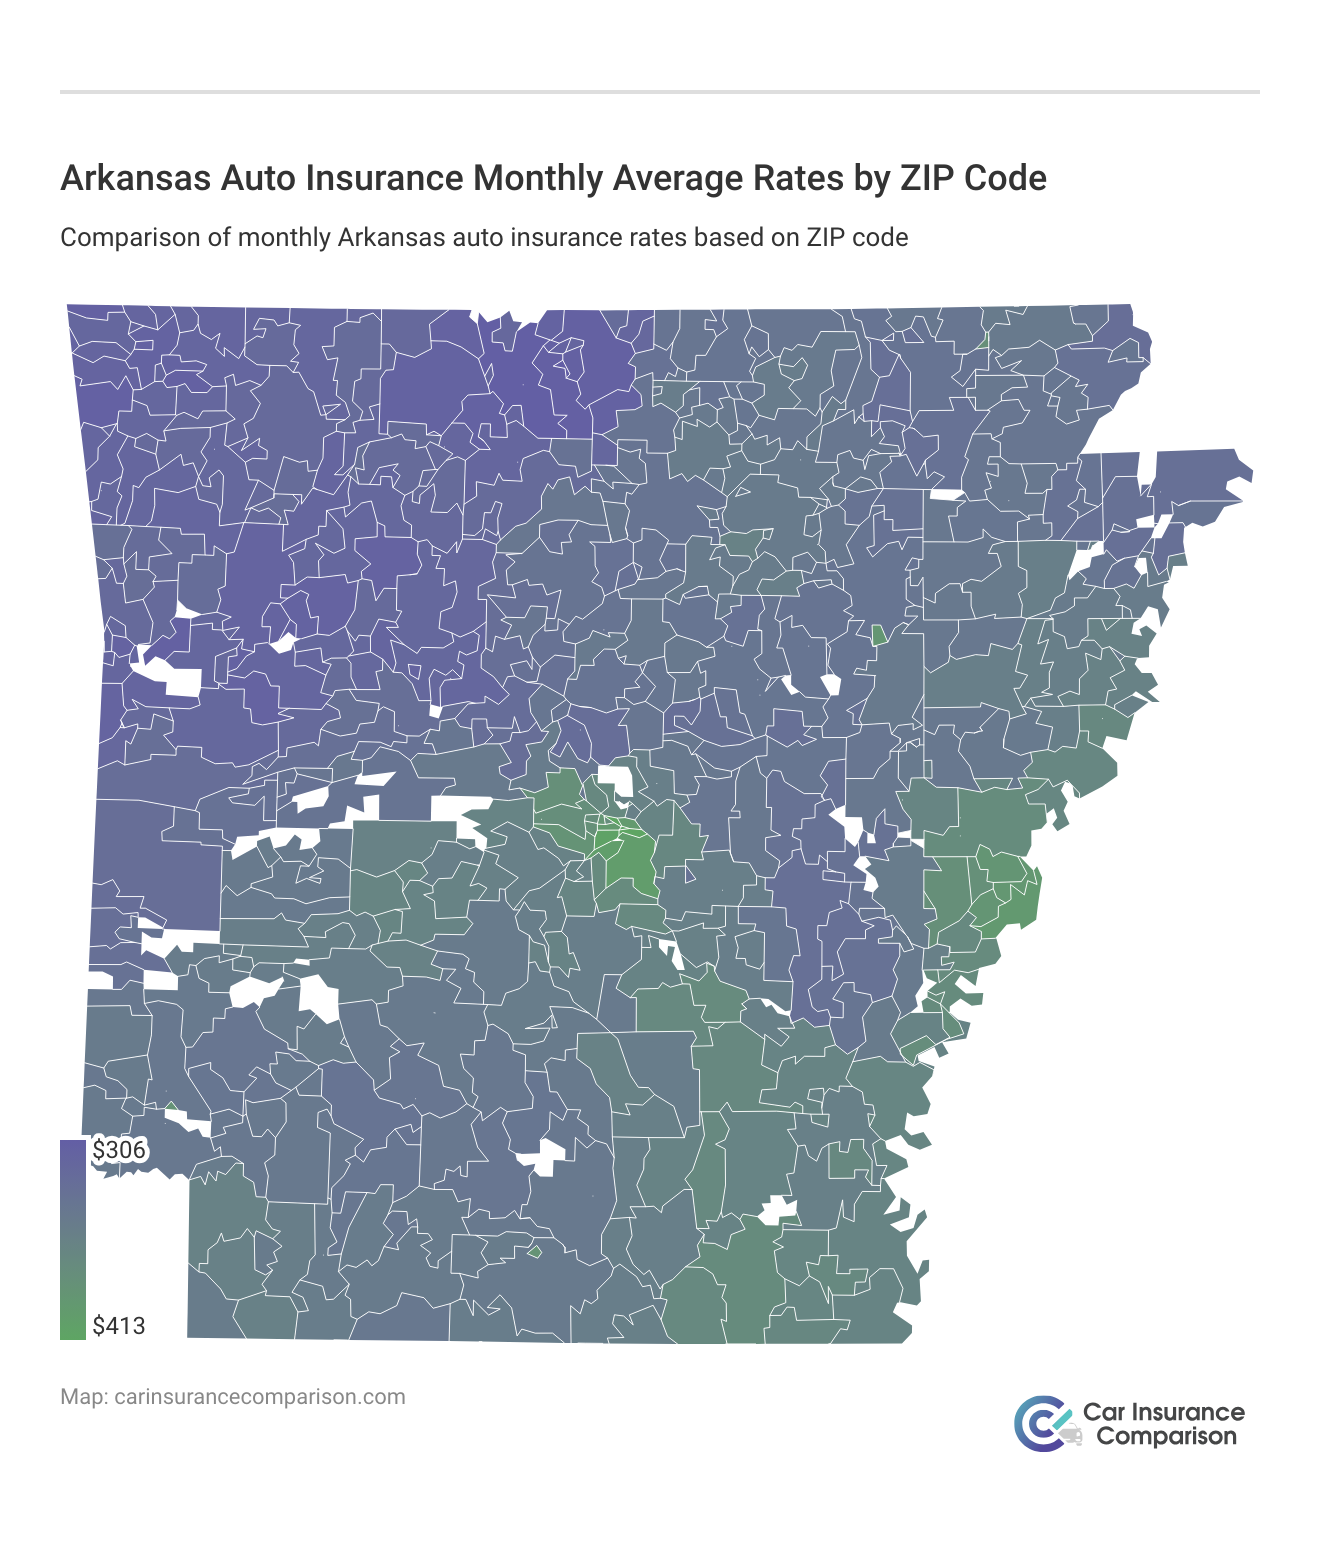 <h3>Arkansas Auto Insurance Monthly Average Rates by ZIP Code</h3>